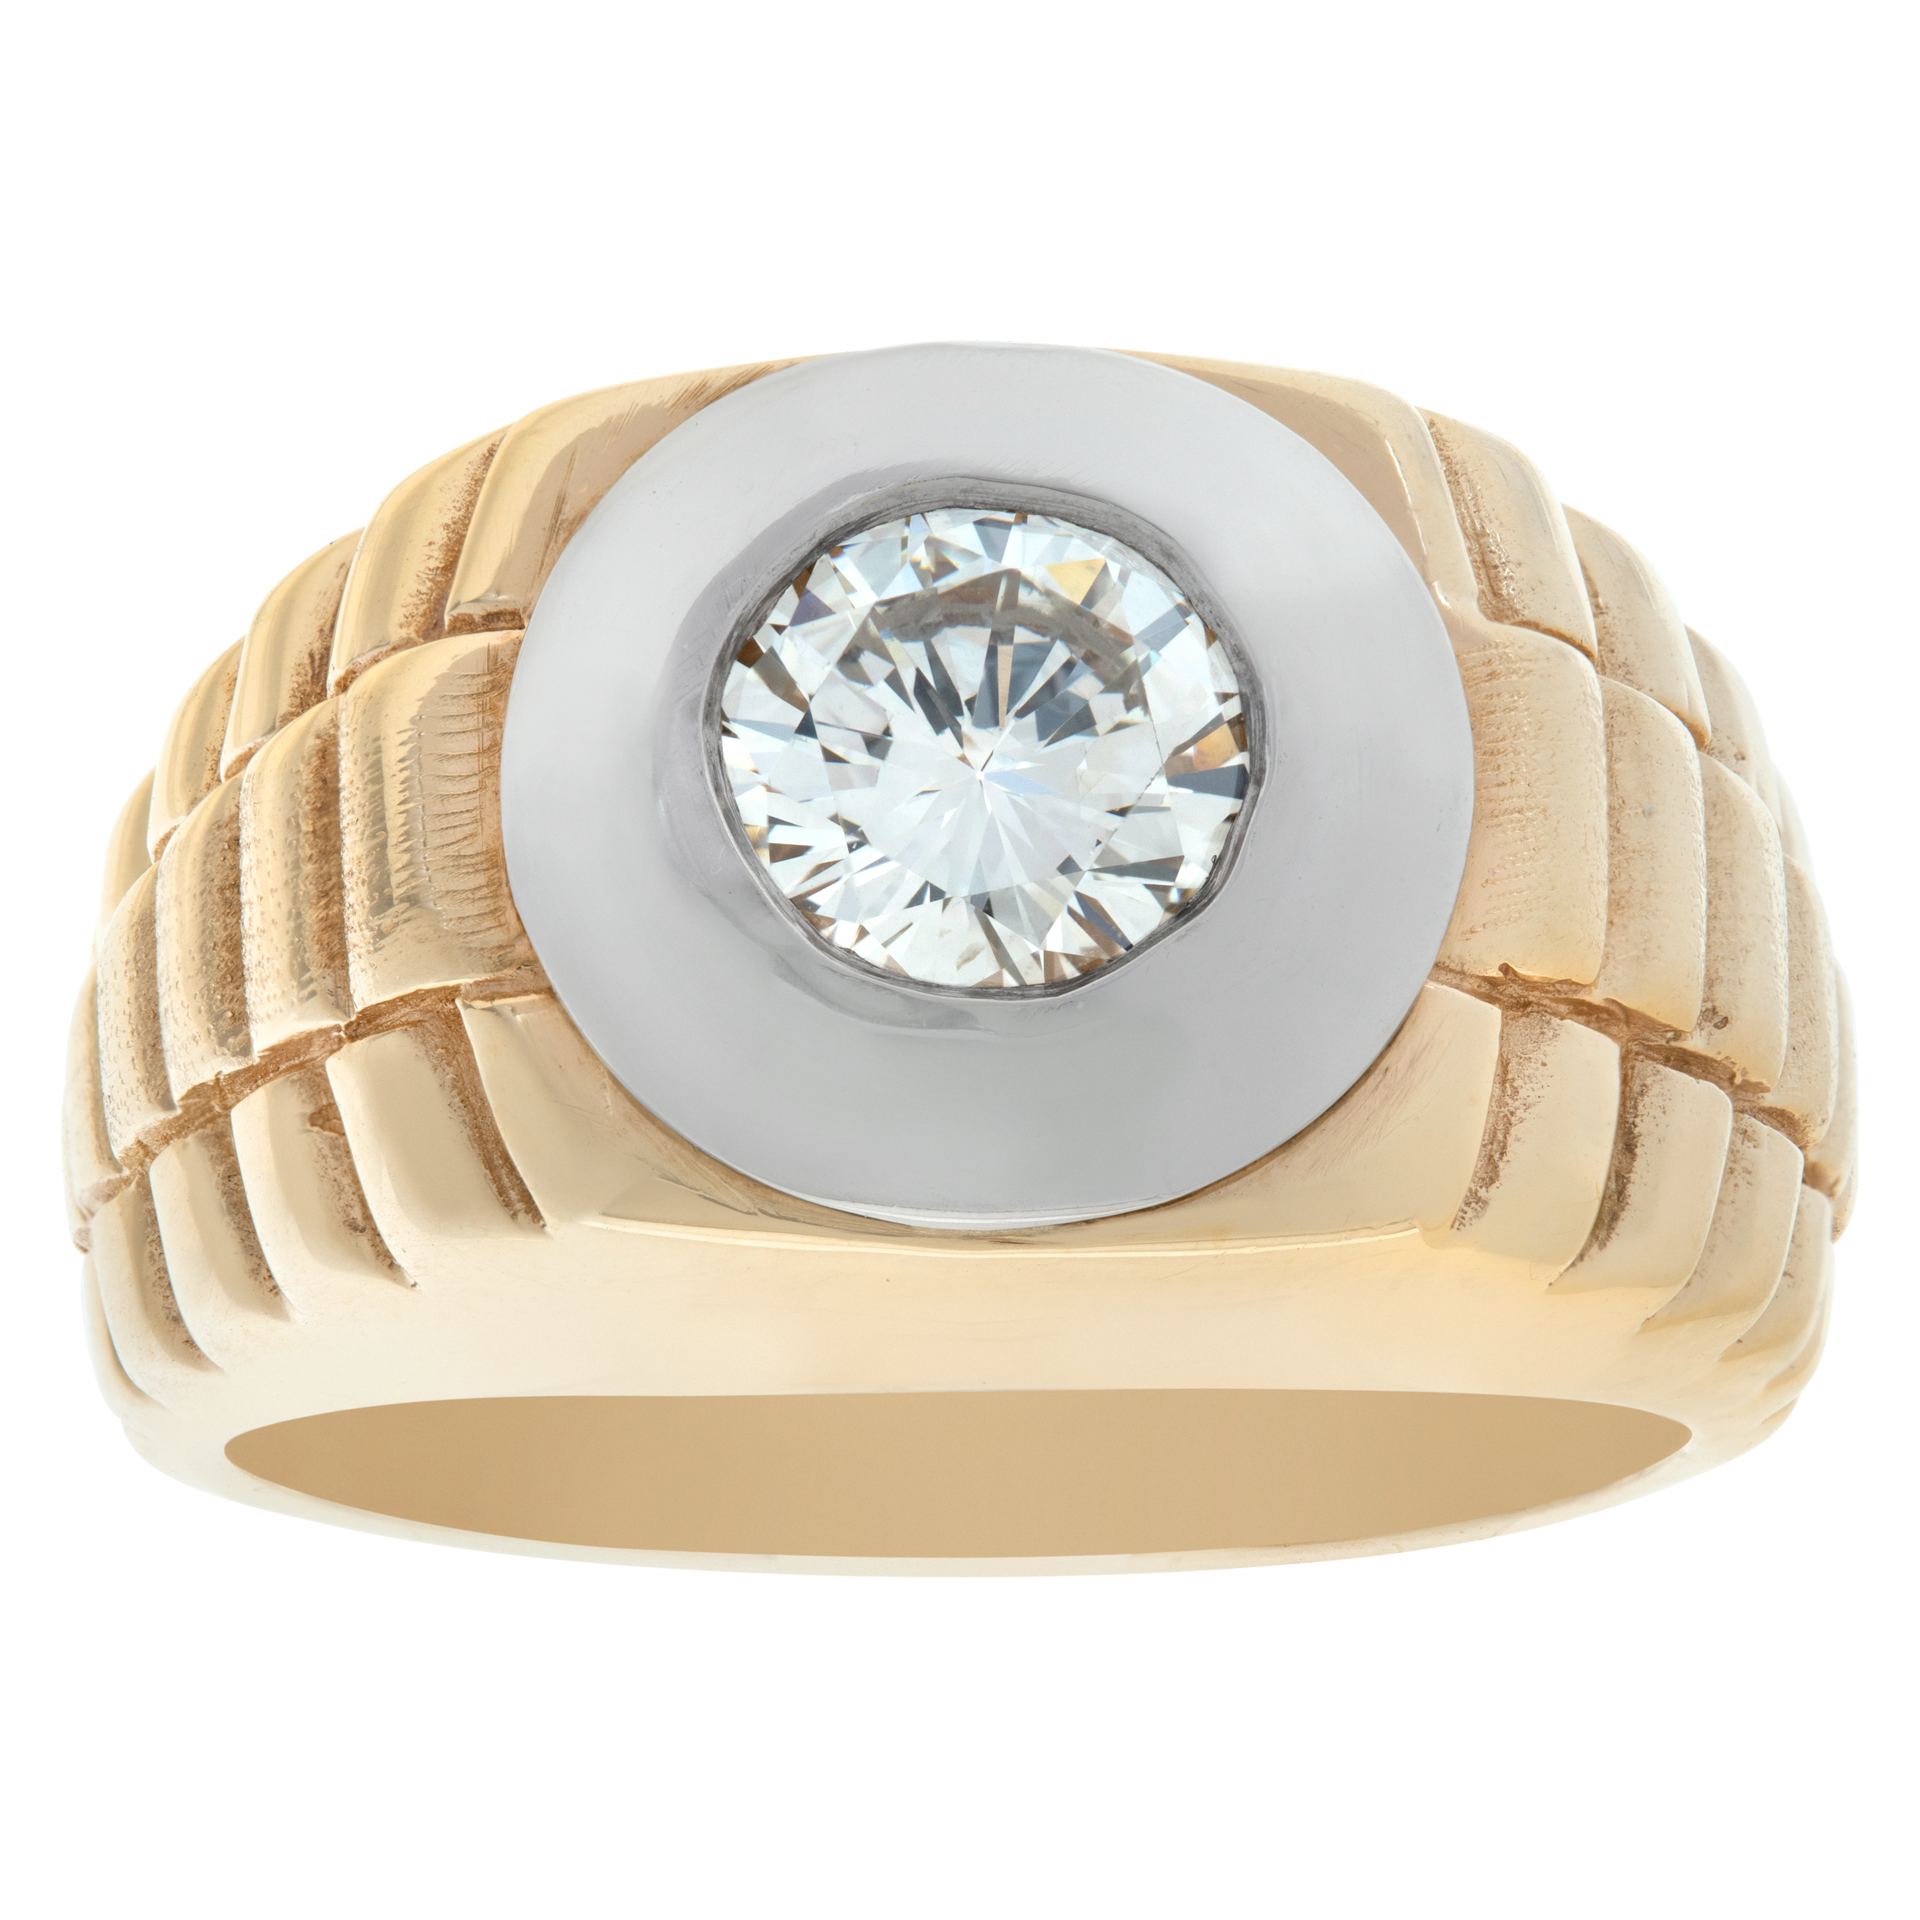 Round brilliant cut diamond ring set in 14k yellow & white gold mounting "rolex' style image 1